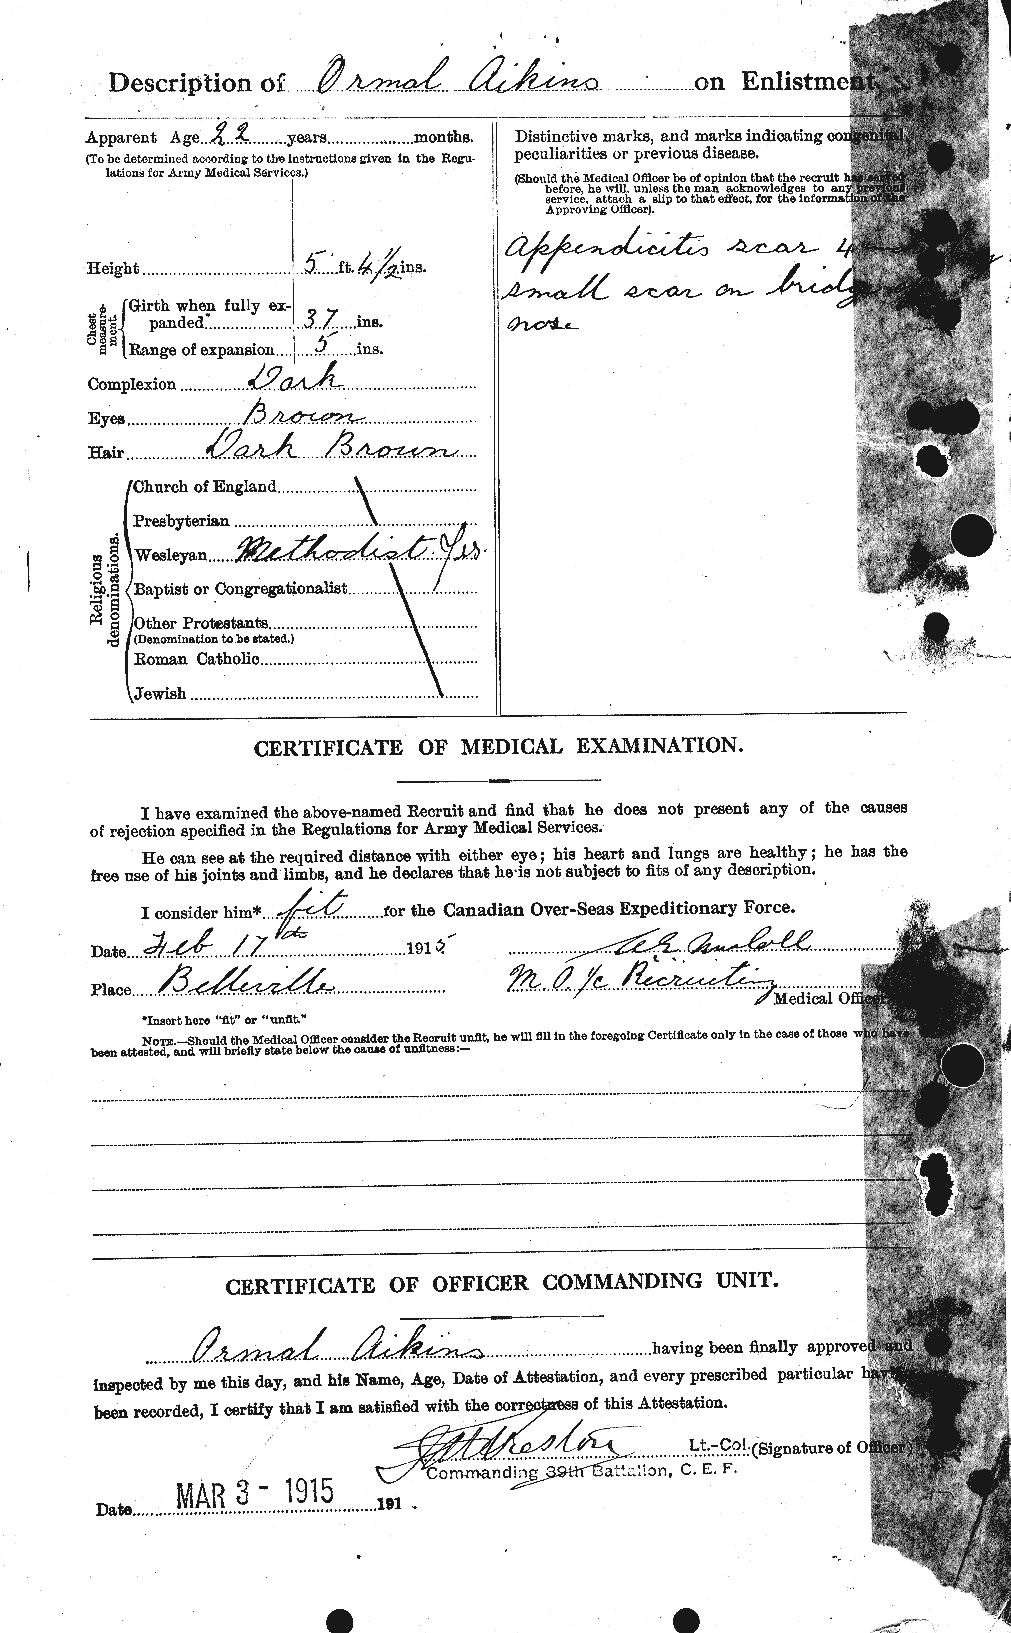 Personnel Records of the First World War - CEF 204184b